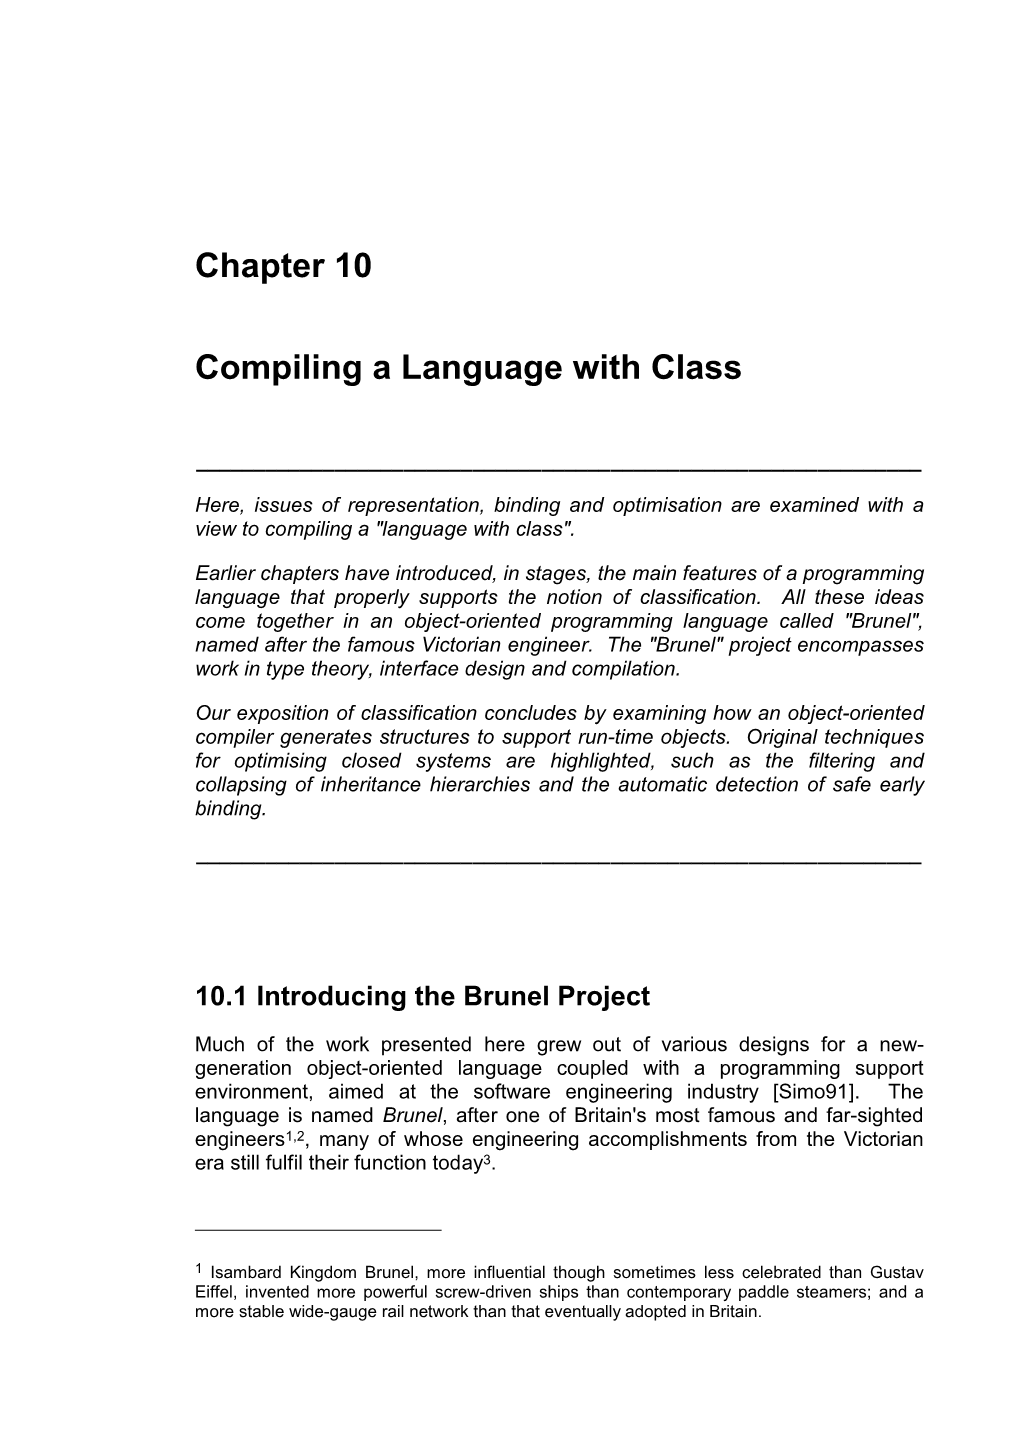 Chapter 10 Compiling a Language with Class